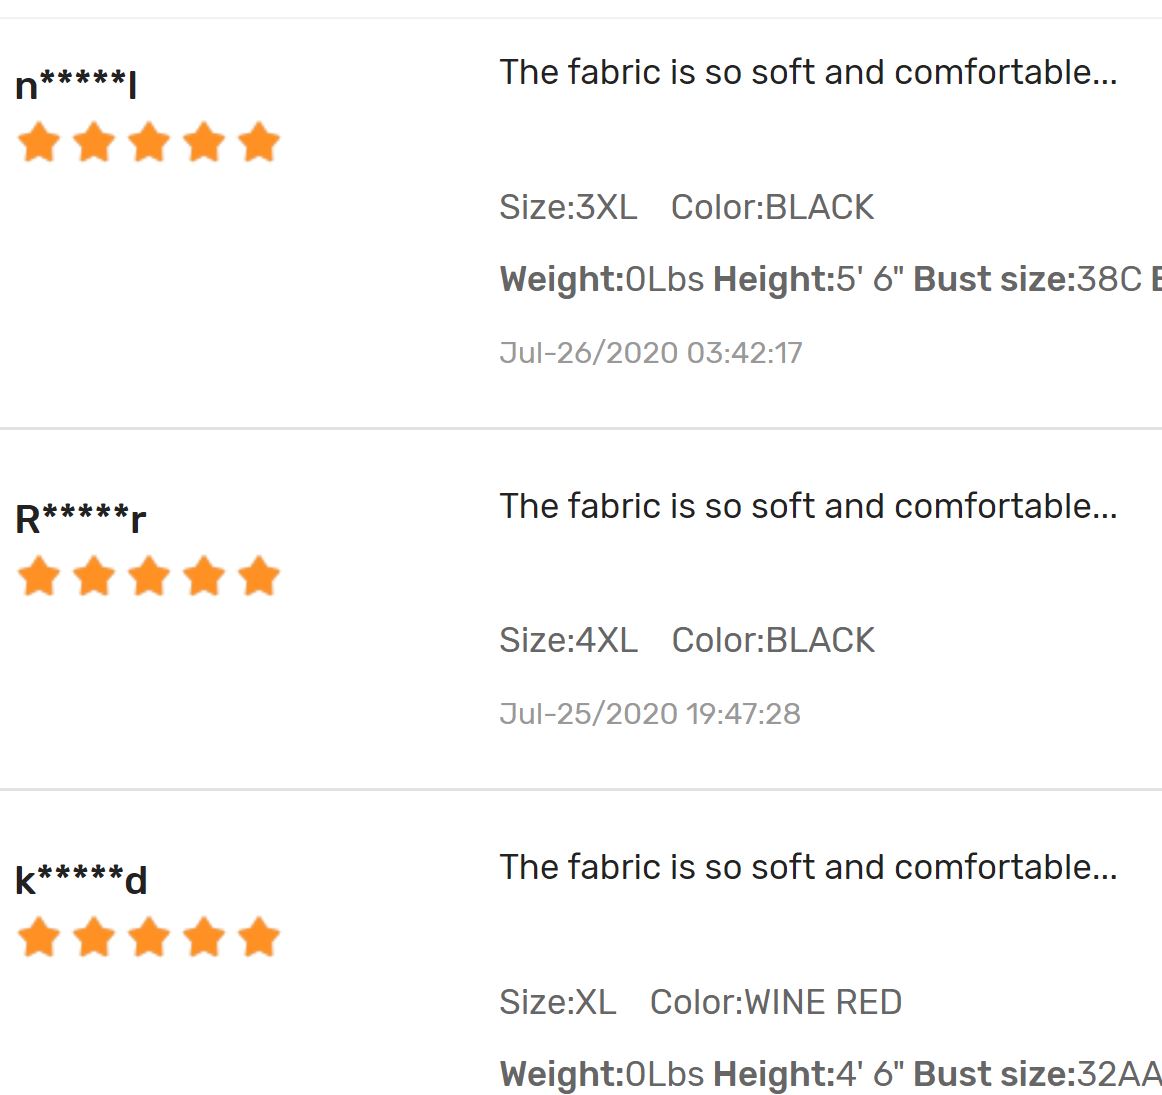 Identical falsified reviews